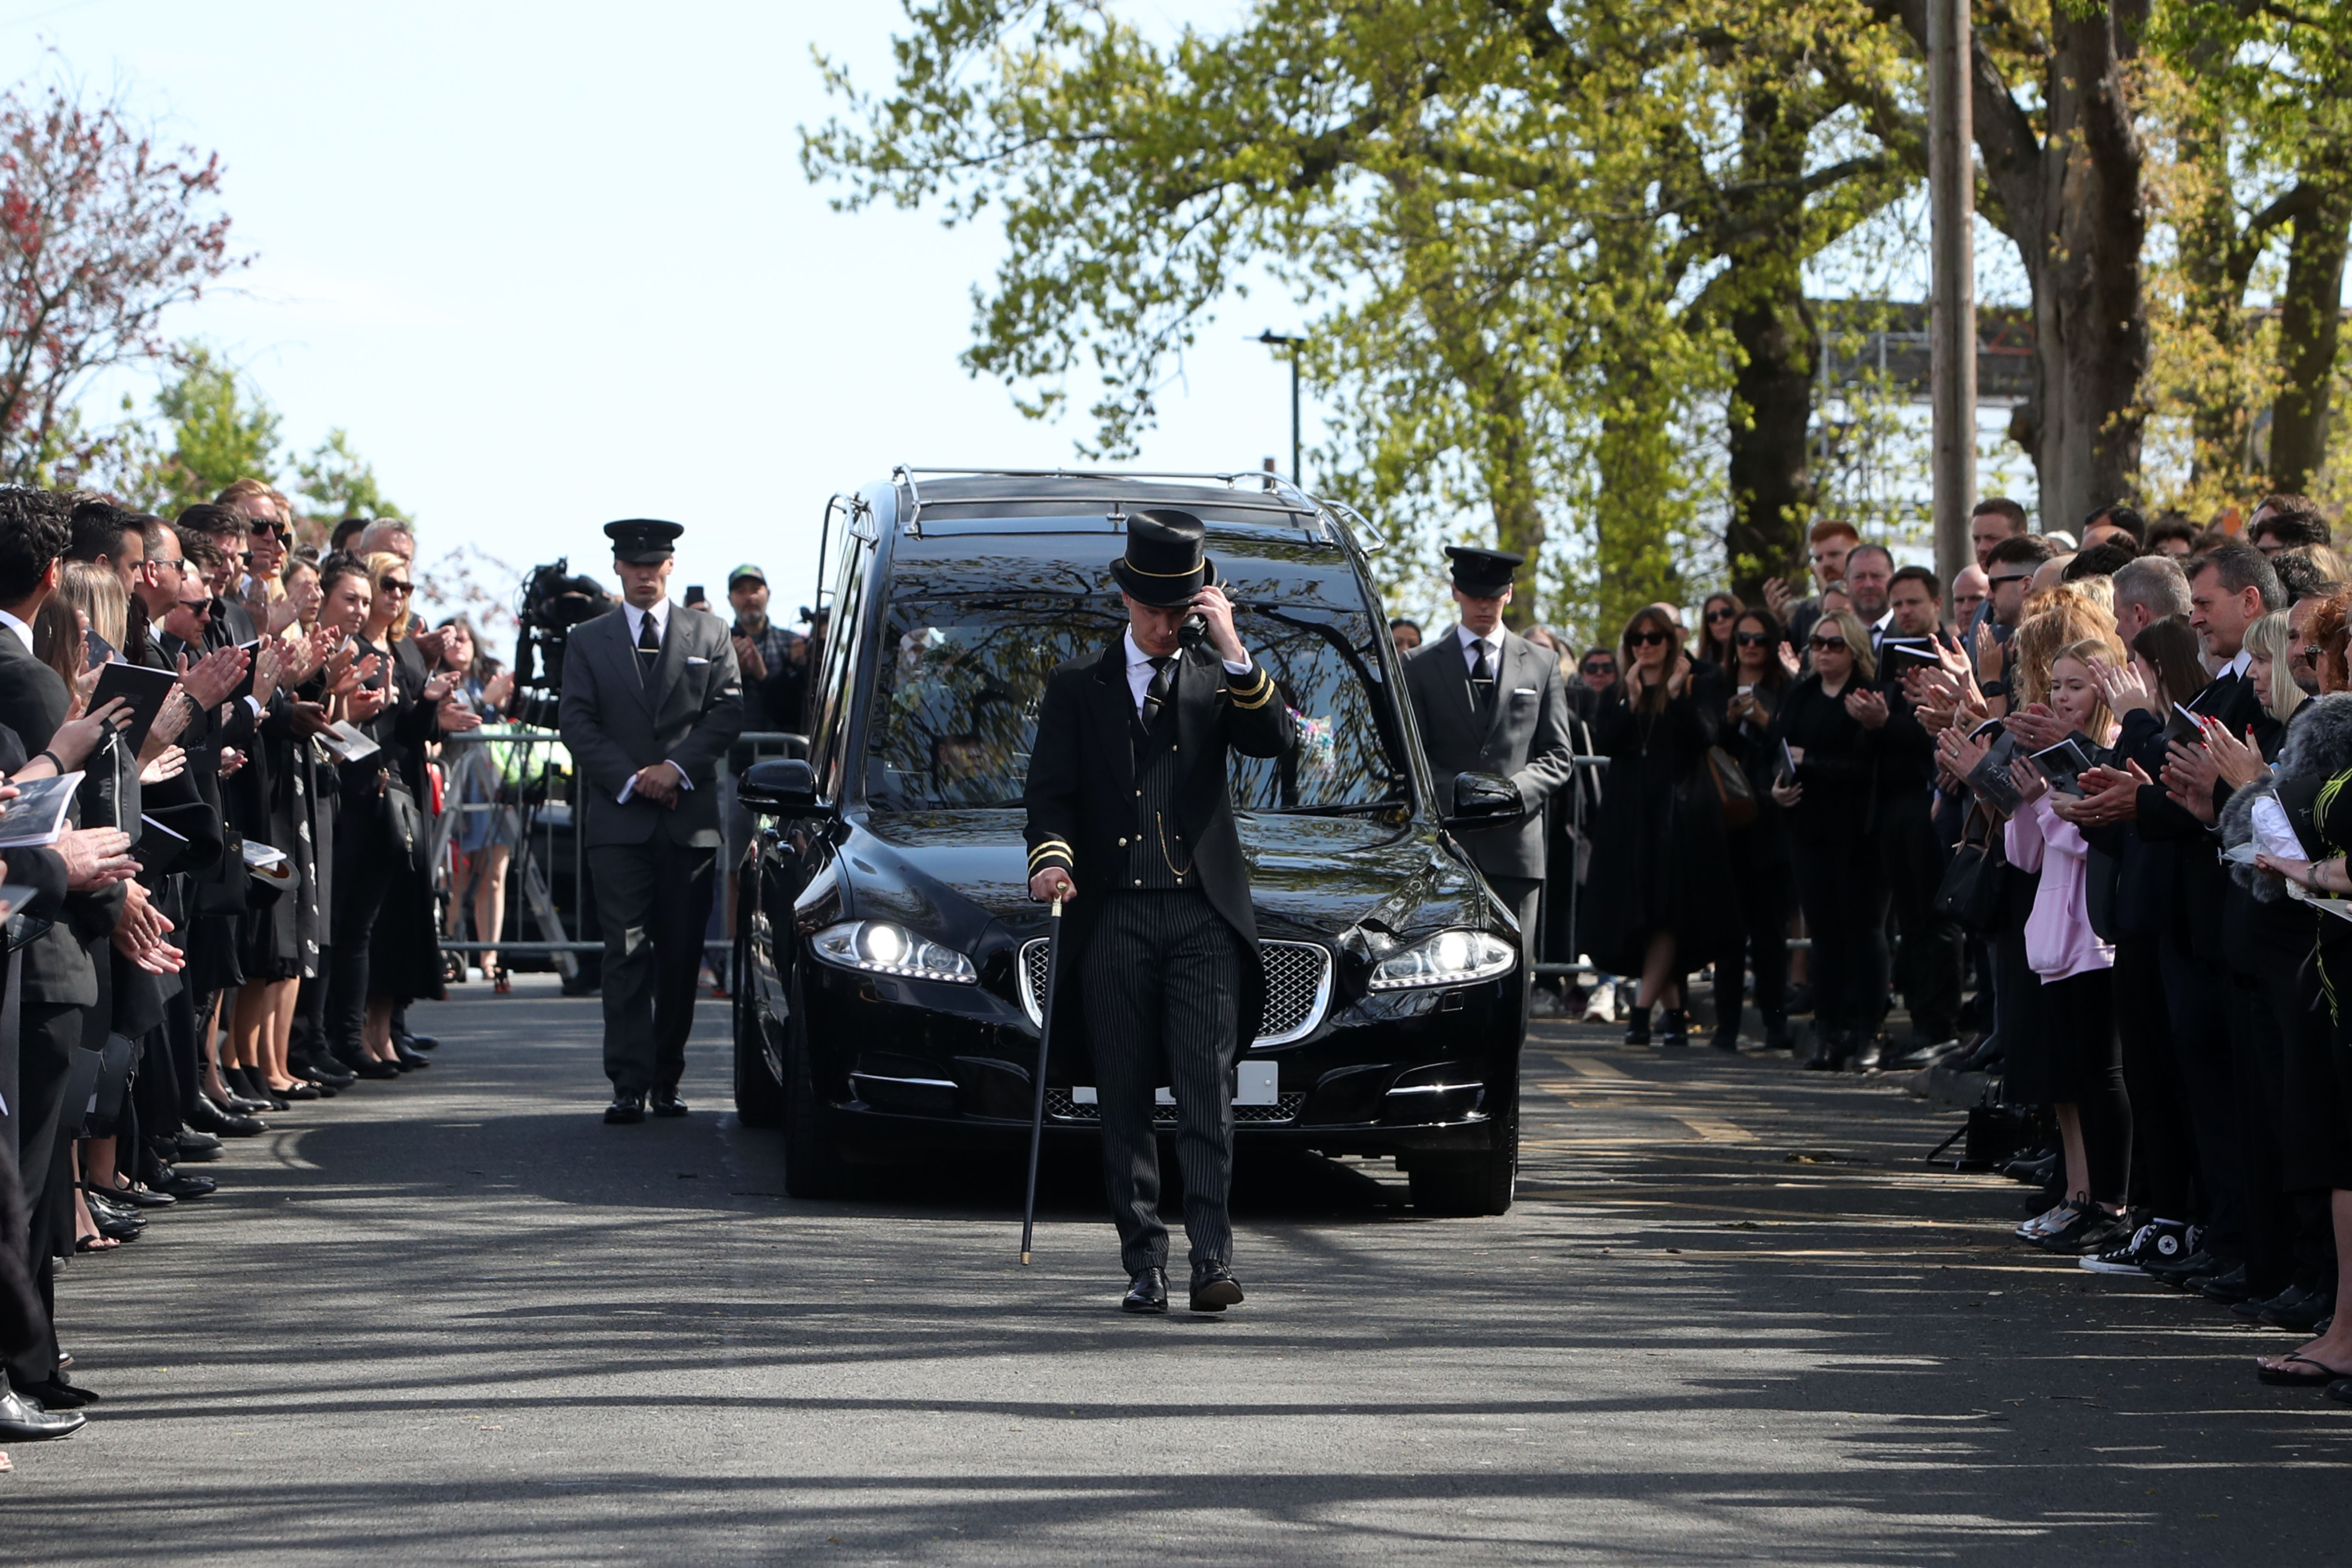 The band's fans lined the streets for Tom's funeral